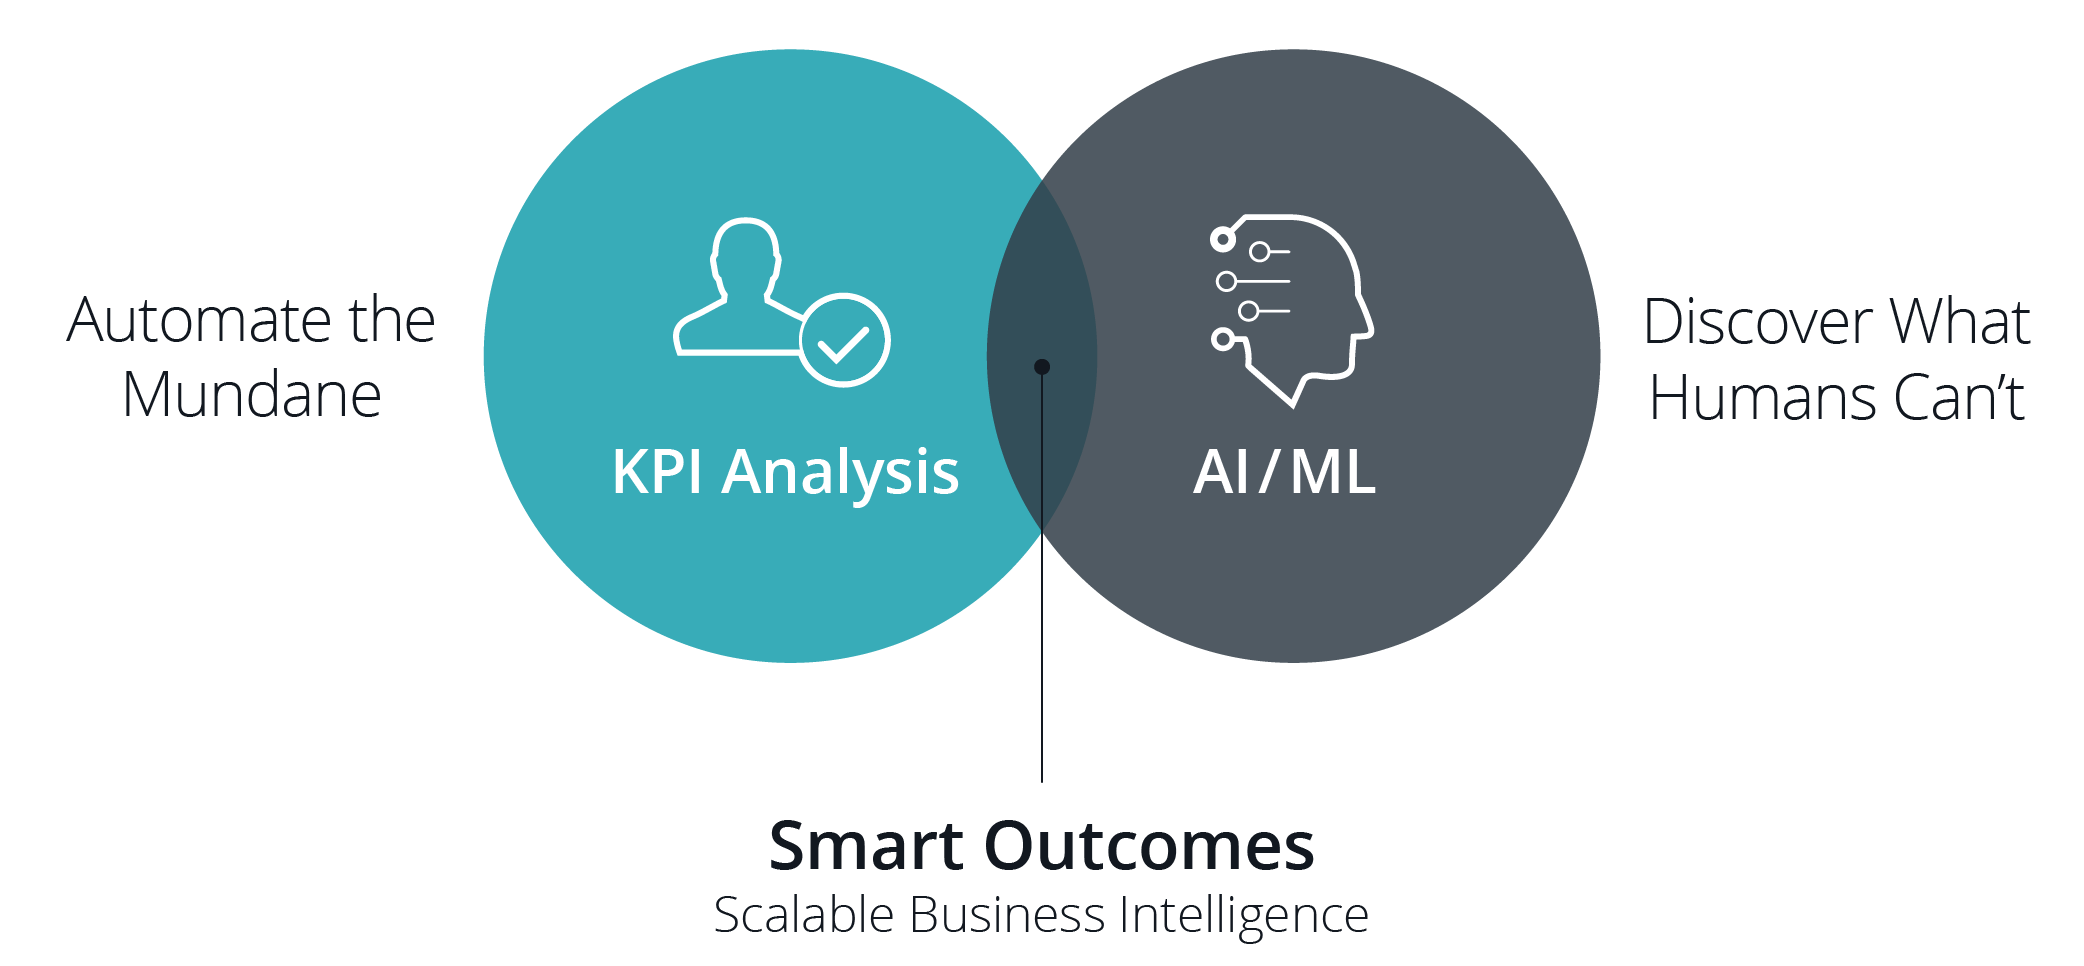 A Paradigm Shift in Actionable Business Intelligence delivering automated operations efficiency